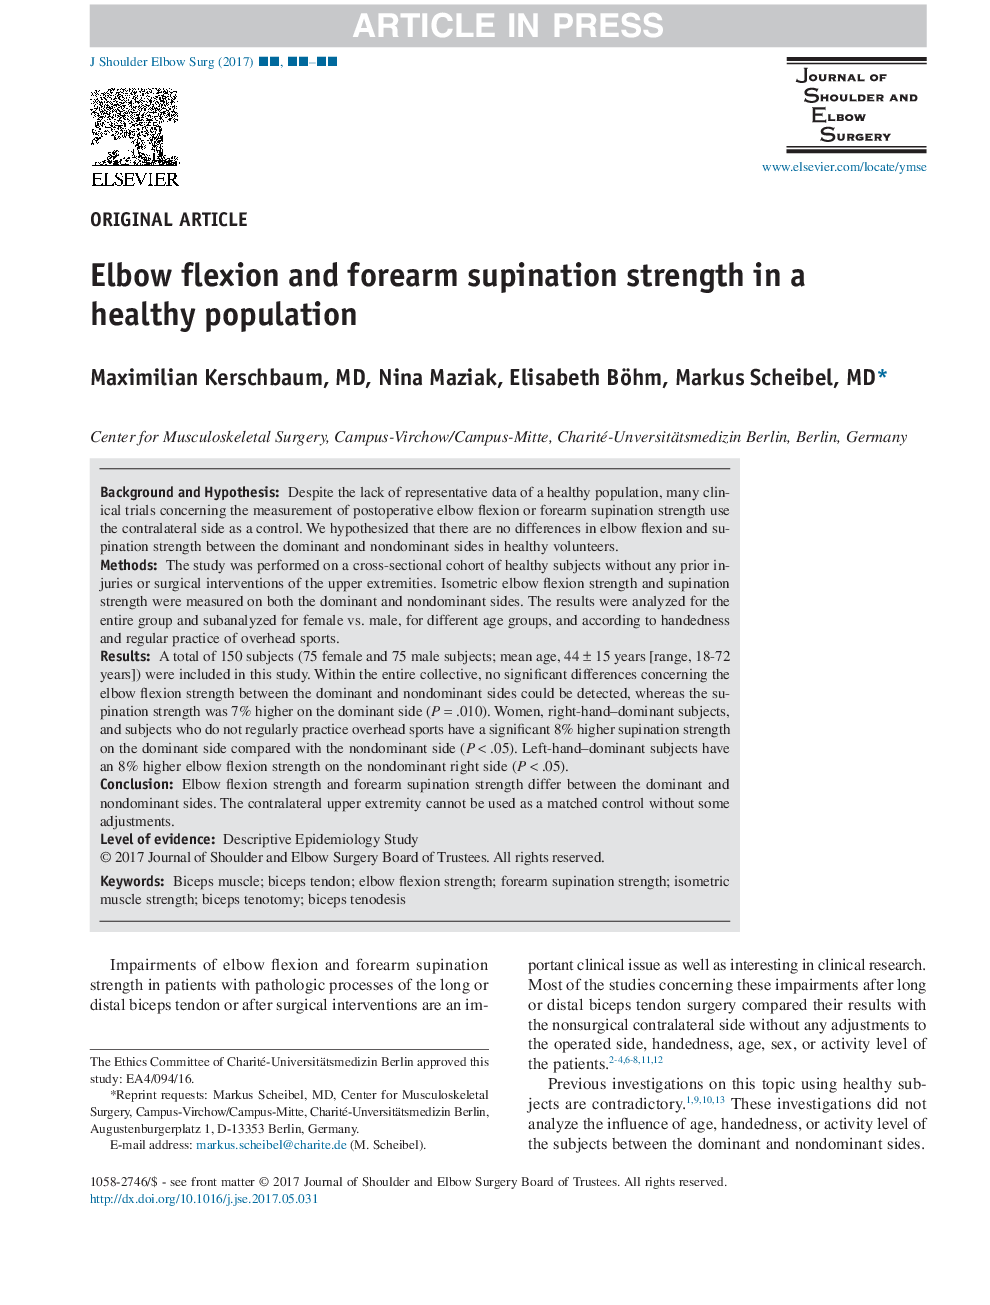 Elbow flexion and forearm supination strength in a healthy population